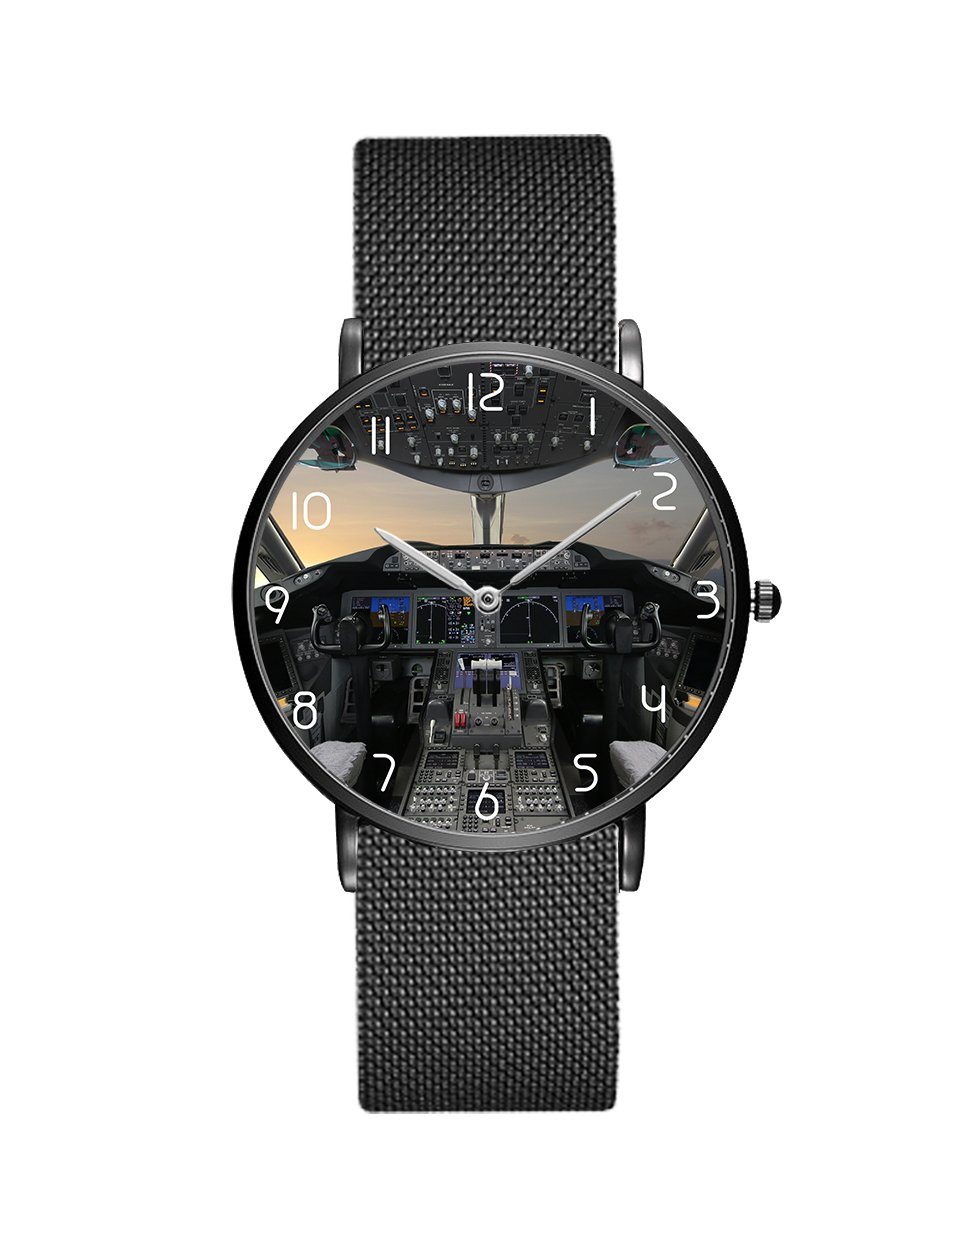 Boeing 787 Cocpit Designed Stainless Steel Strap Watches Pilot Eyes Store Black & Stainless Steel Strap 